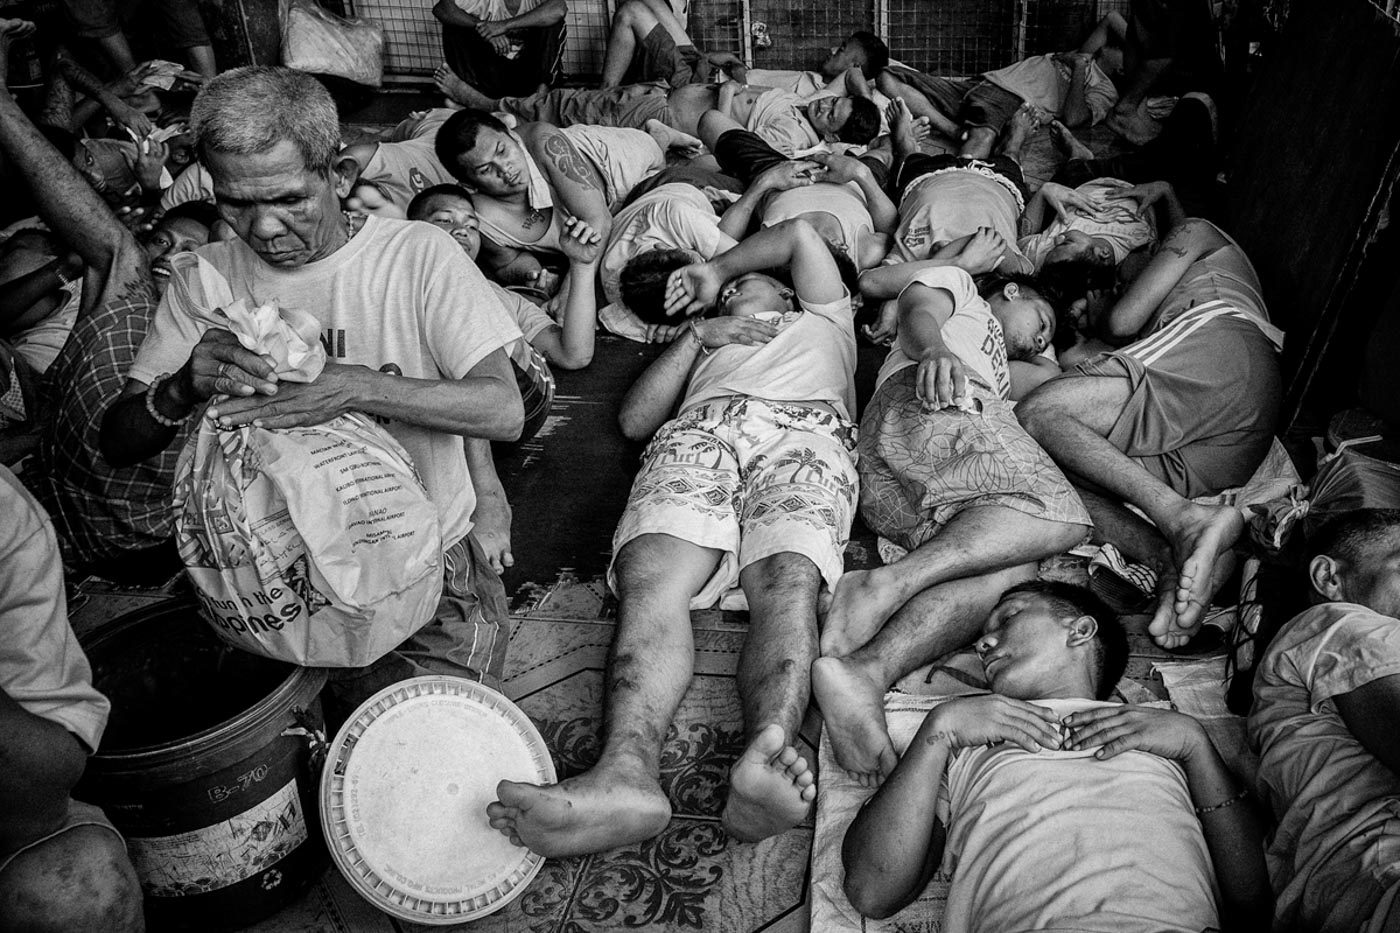 SLEEPING SCHEDULE. Inmates take turns sleeping in an overcrowded jail cell. Photo by Rick Rocamora 